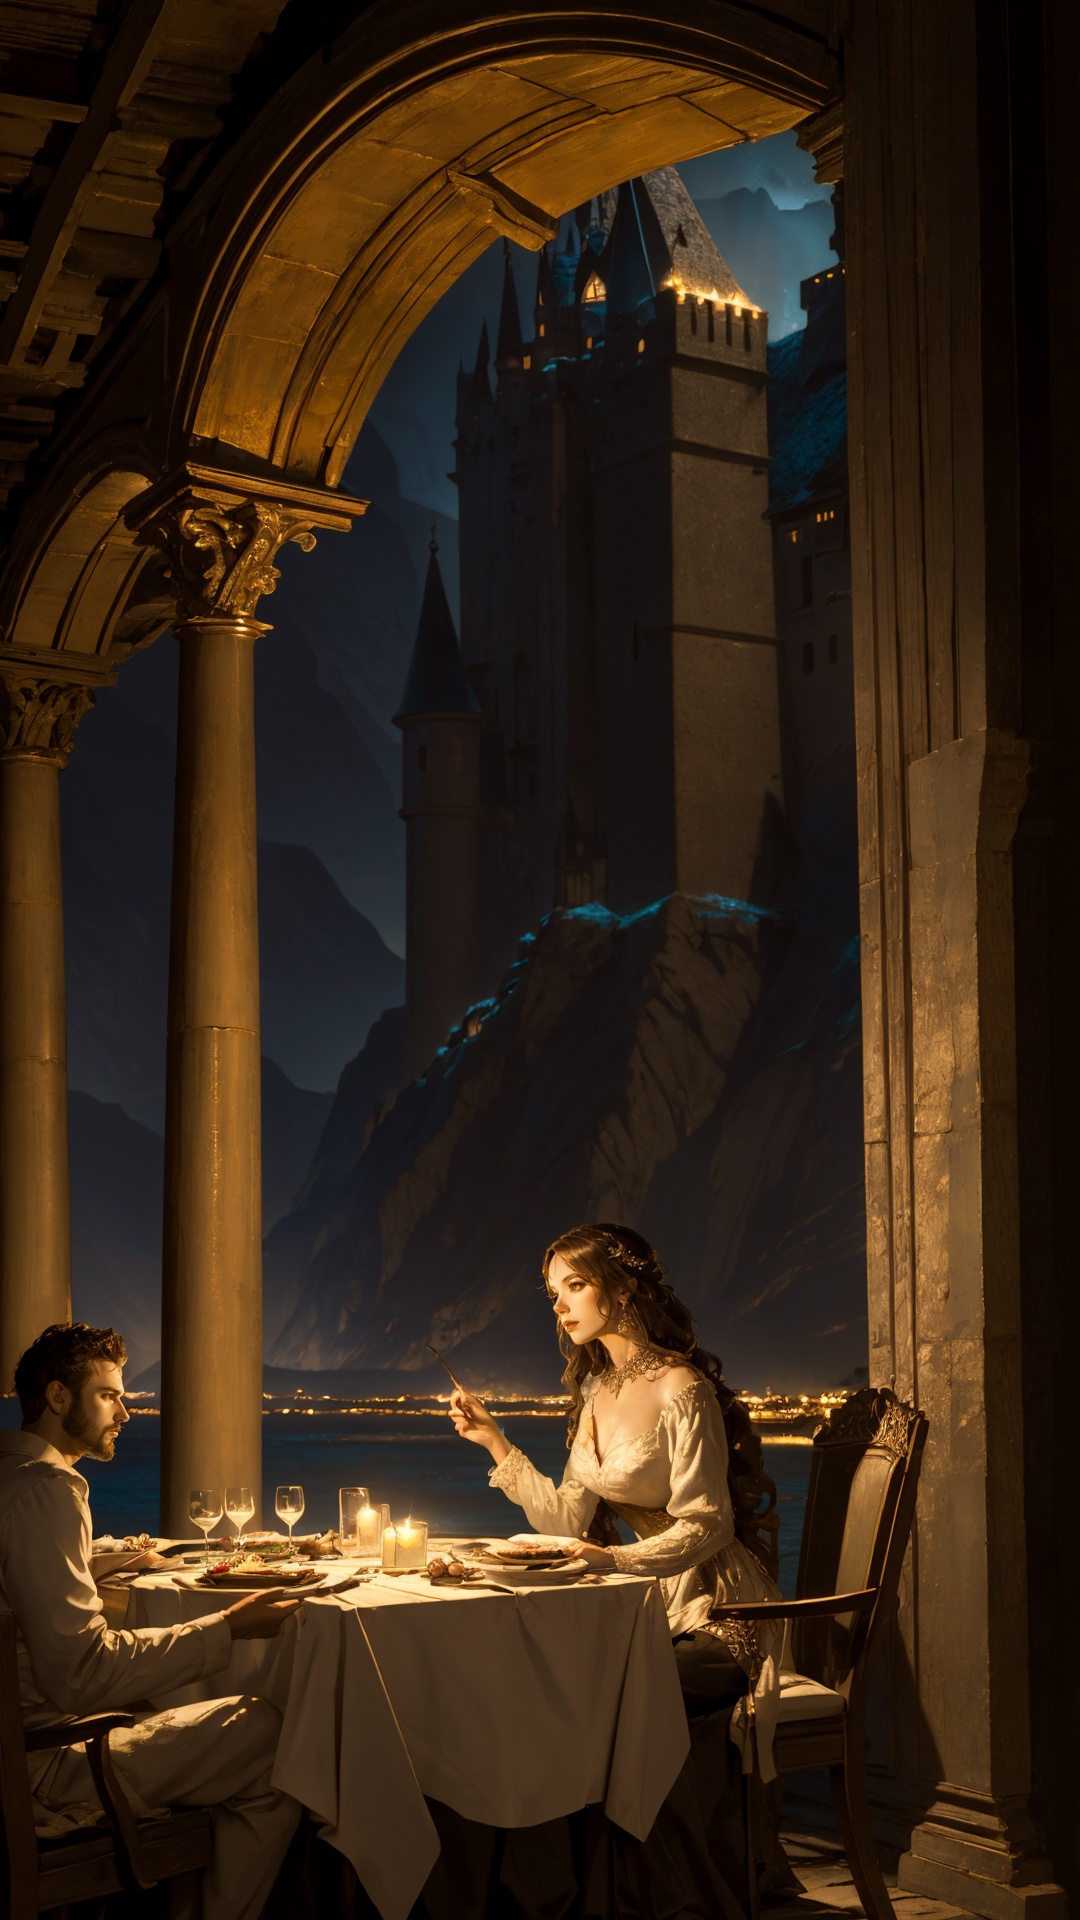 on parchment Romantic dinner on the beach detailing magical realm fantasy scene dramatic light sharp details